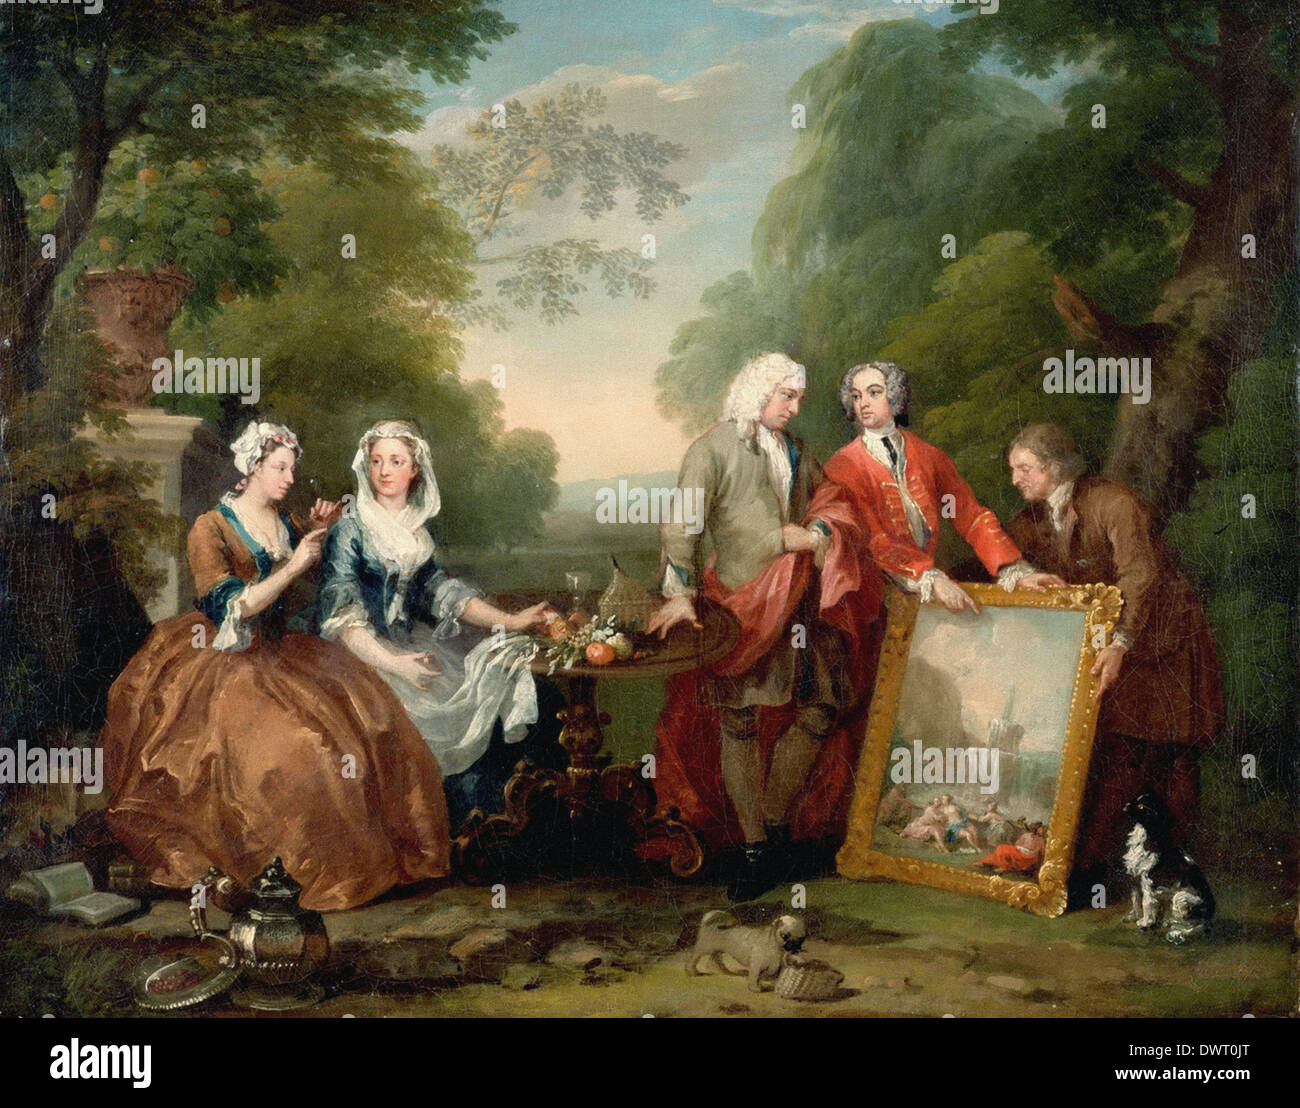 William Hogarth - Conversation Piece (Portrait of Sir Andrew Fountaine with Other Men and Women) Stock Photo